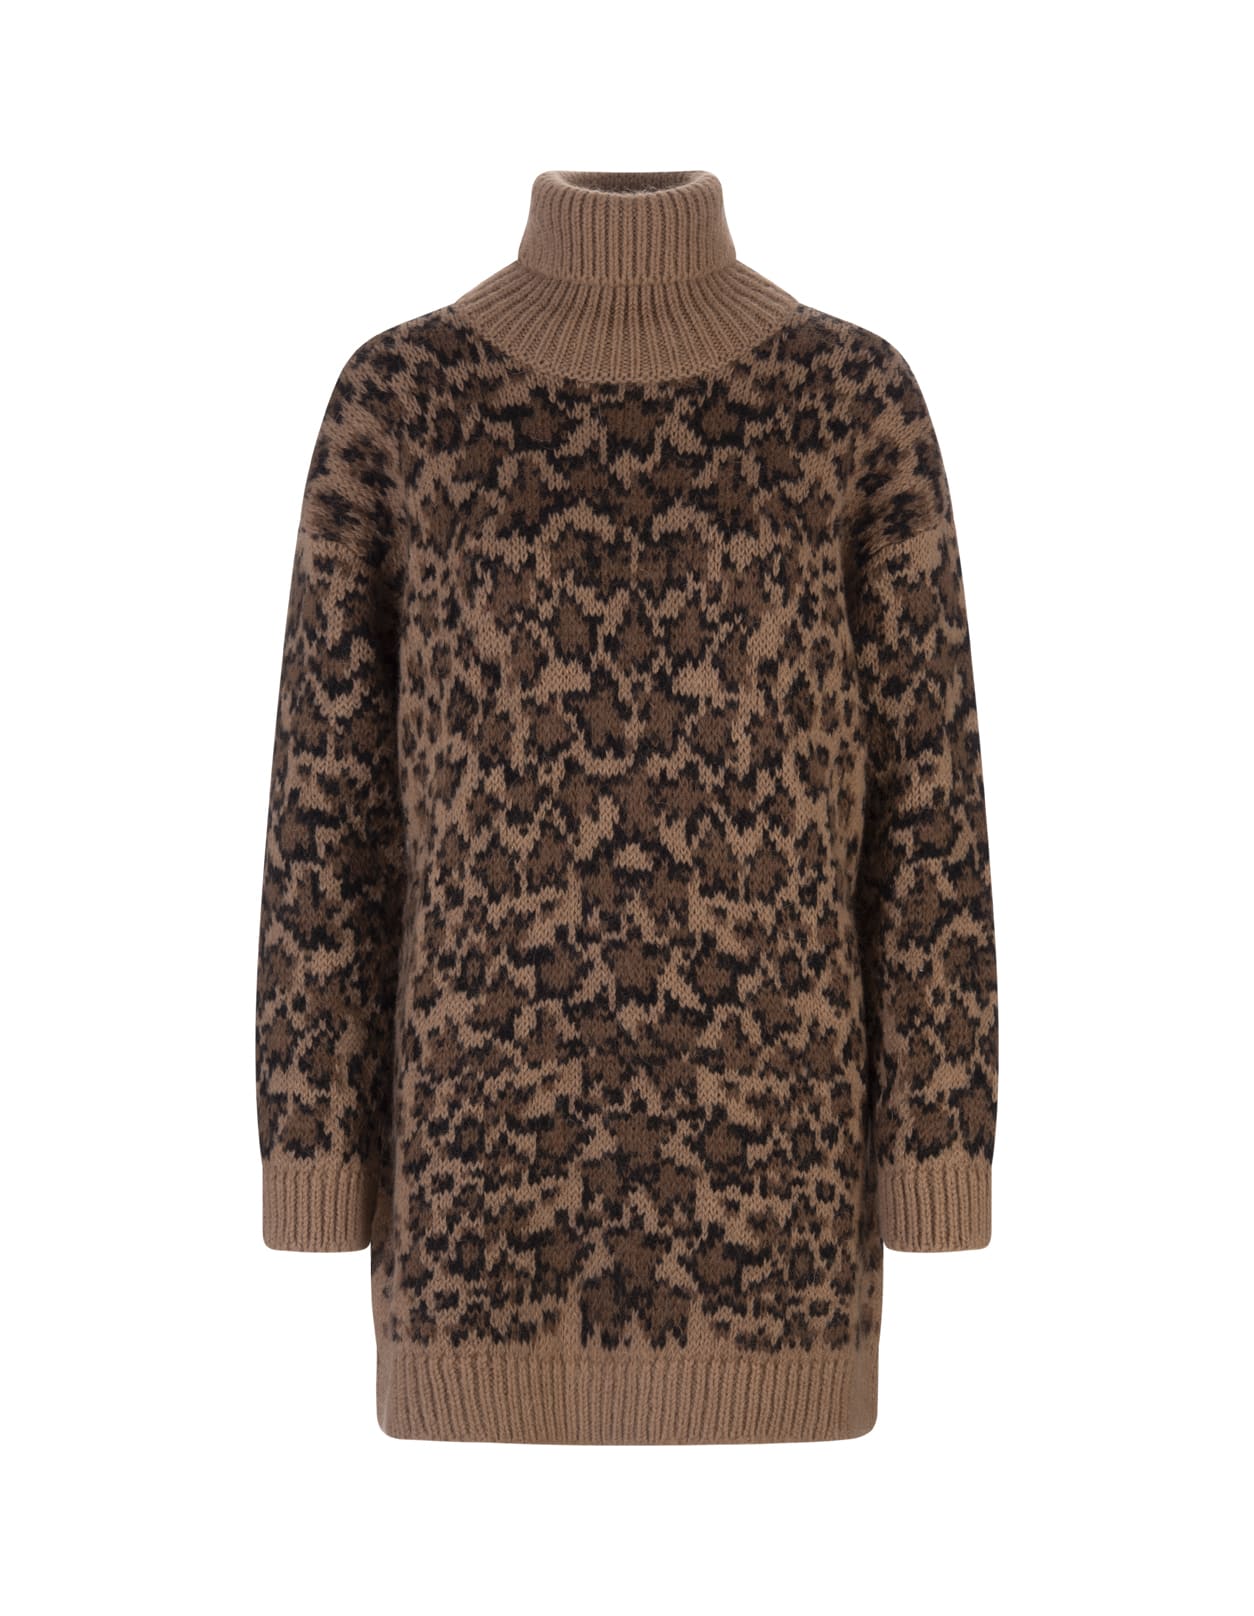 RED Valentino Turtleneck Sweater With Leo Star Motif